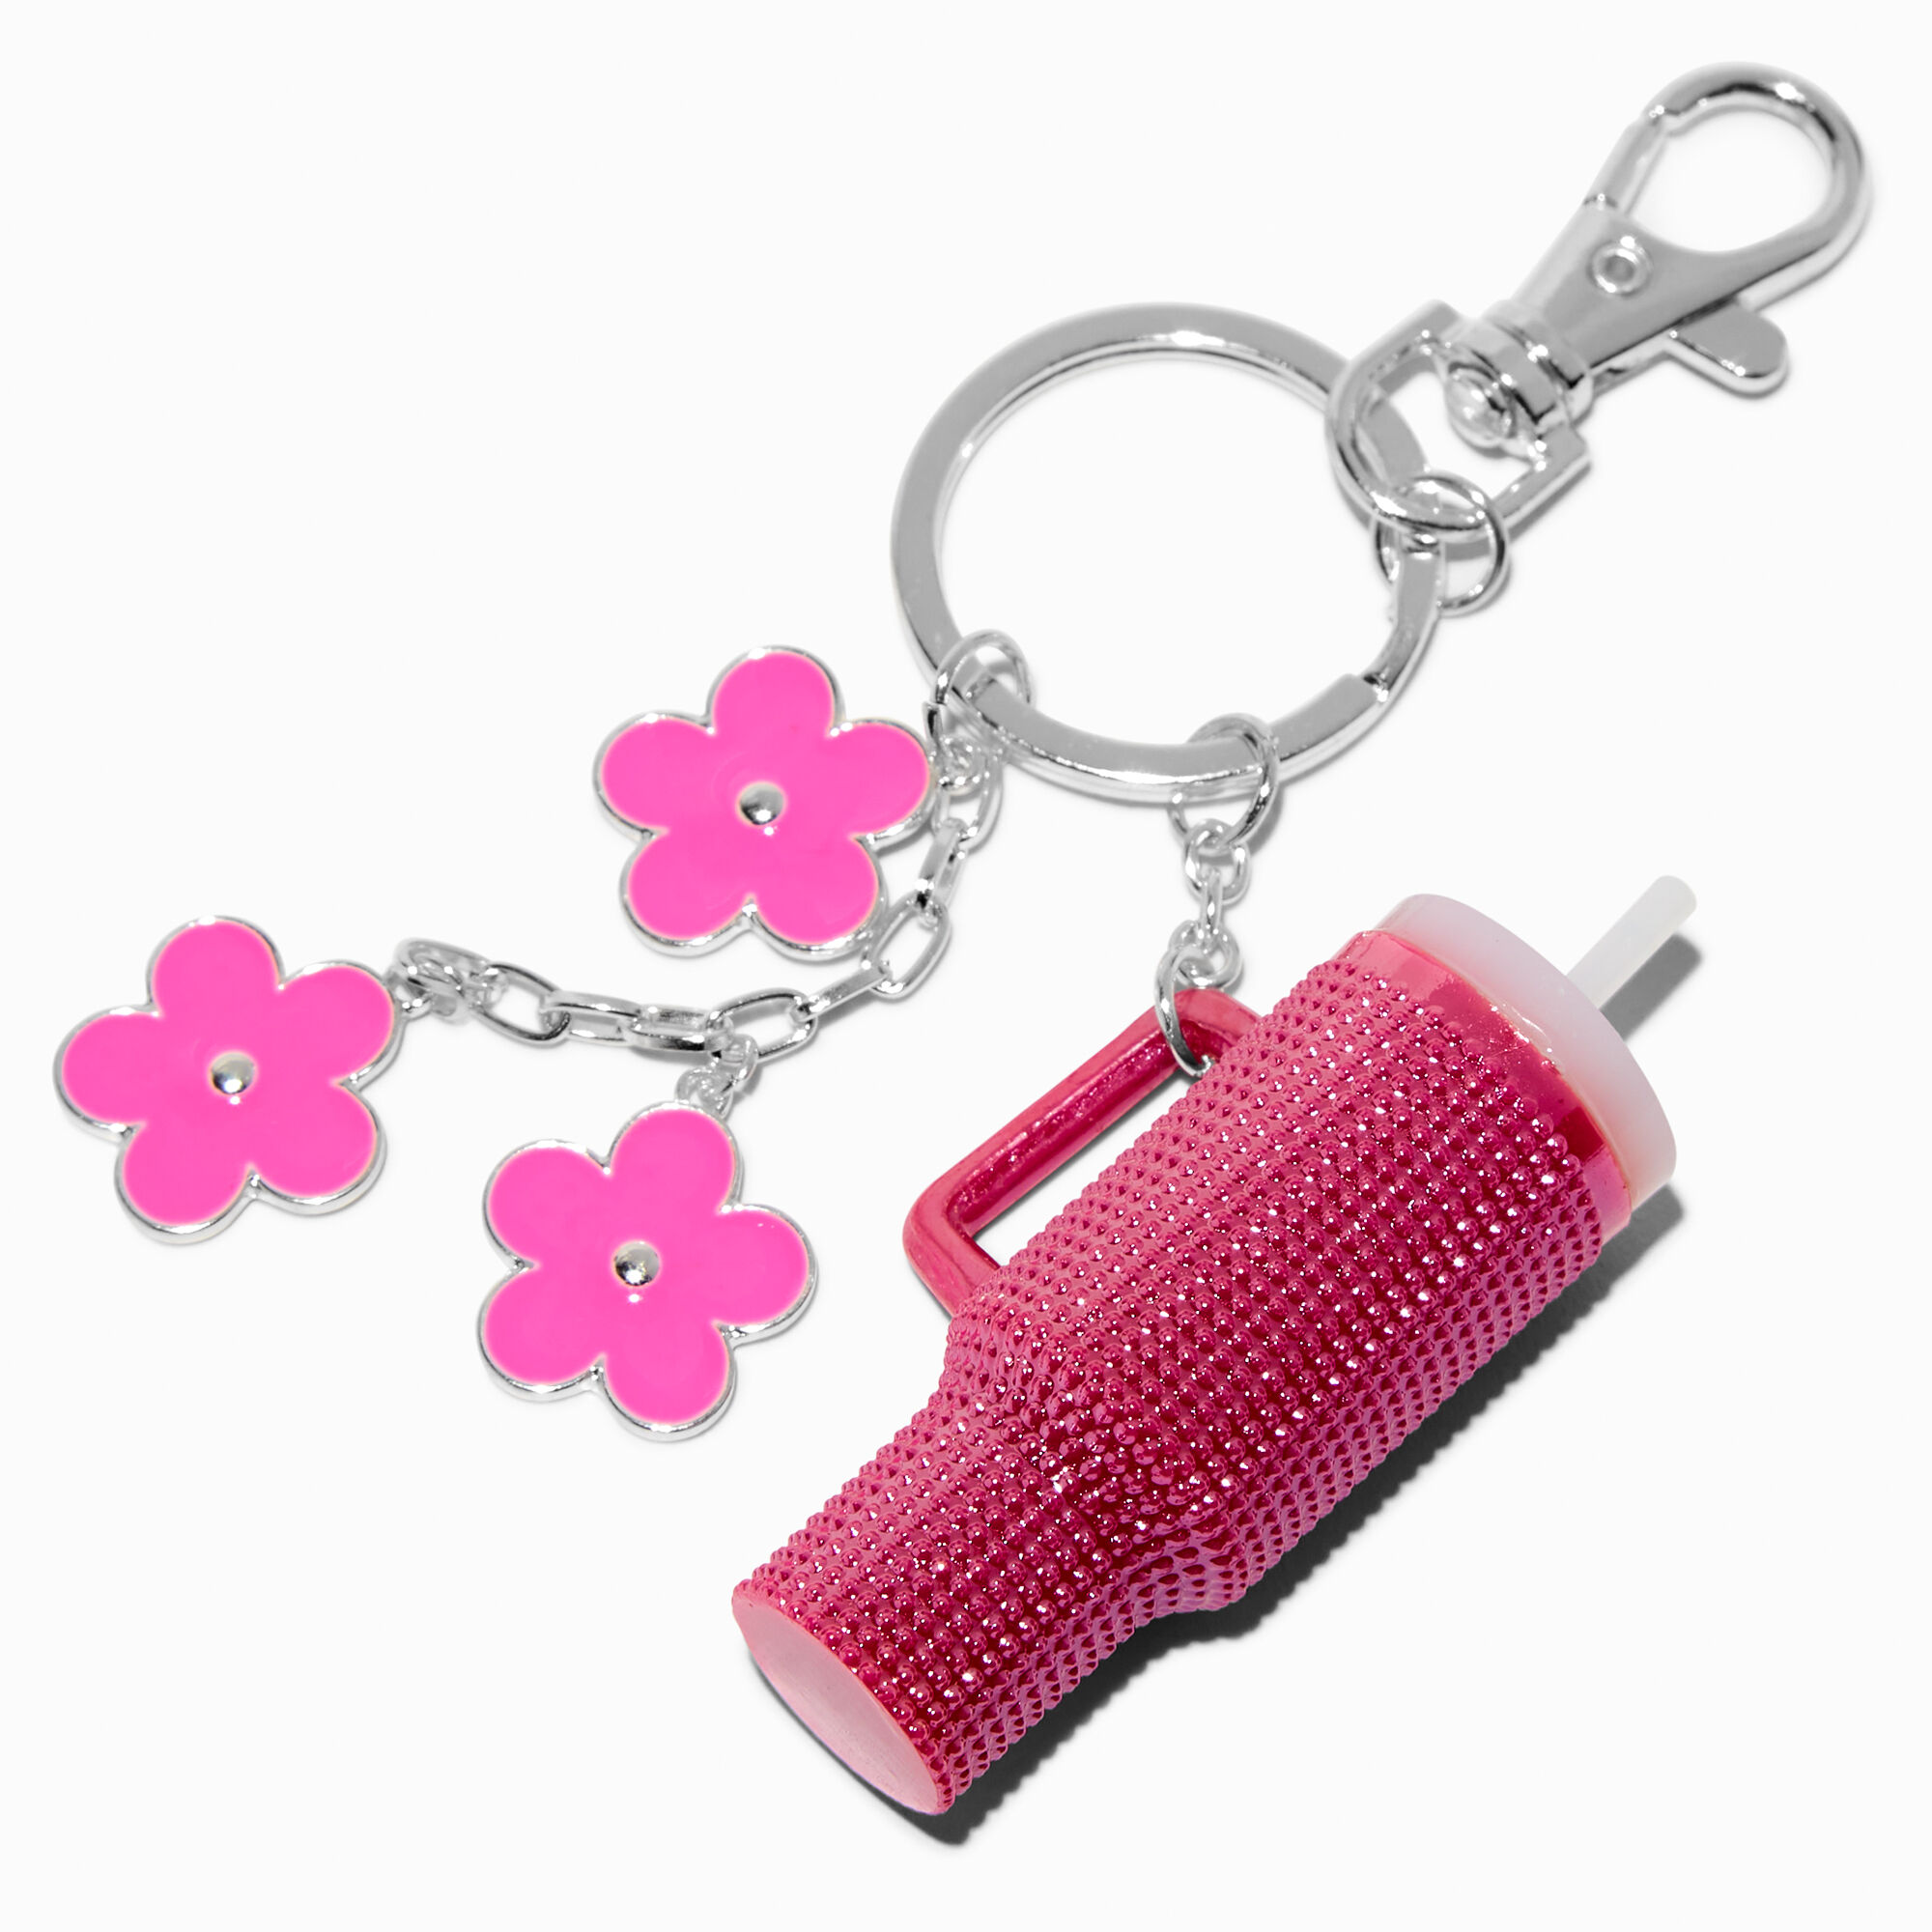 View Claires Tumbler Daisy Keyring Pink information